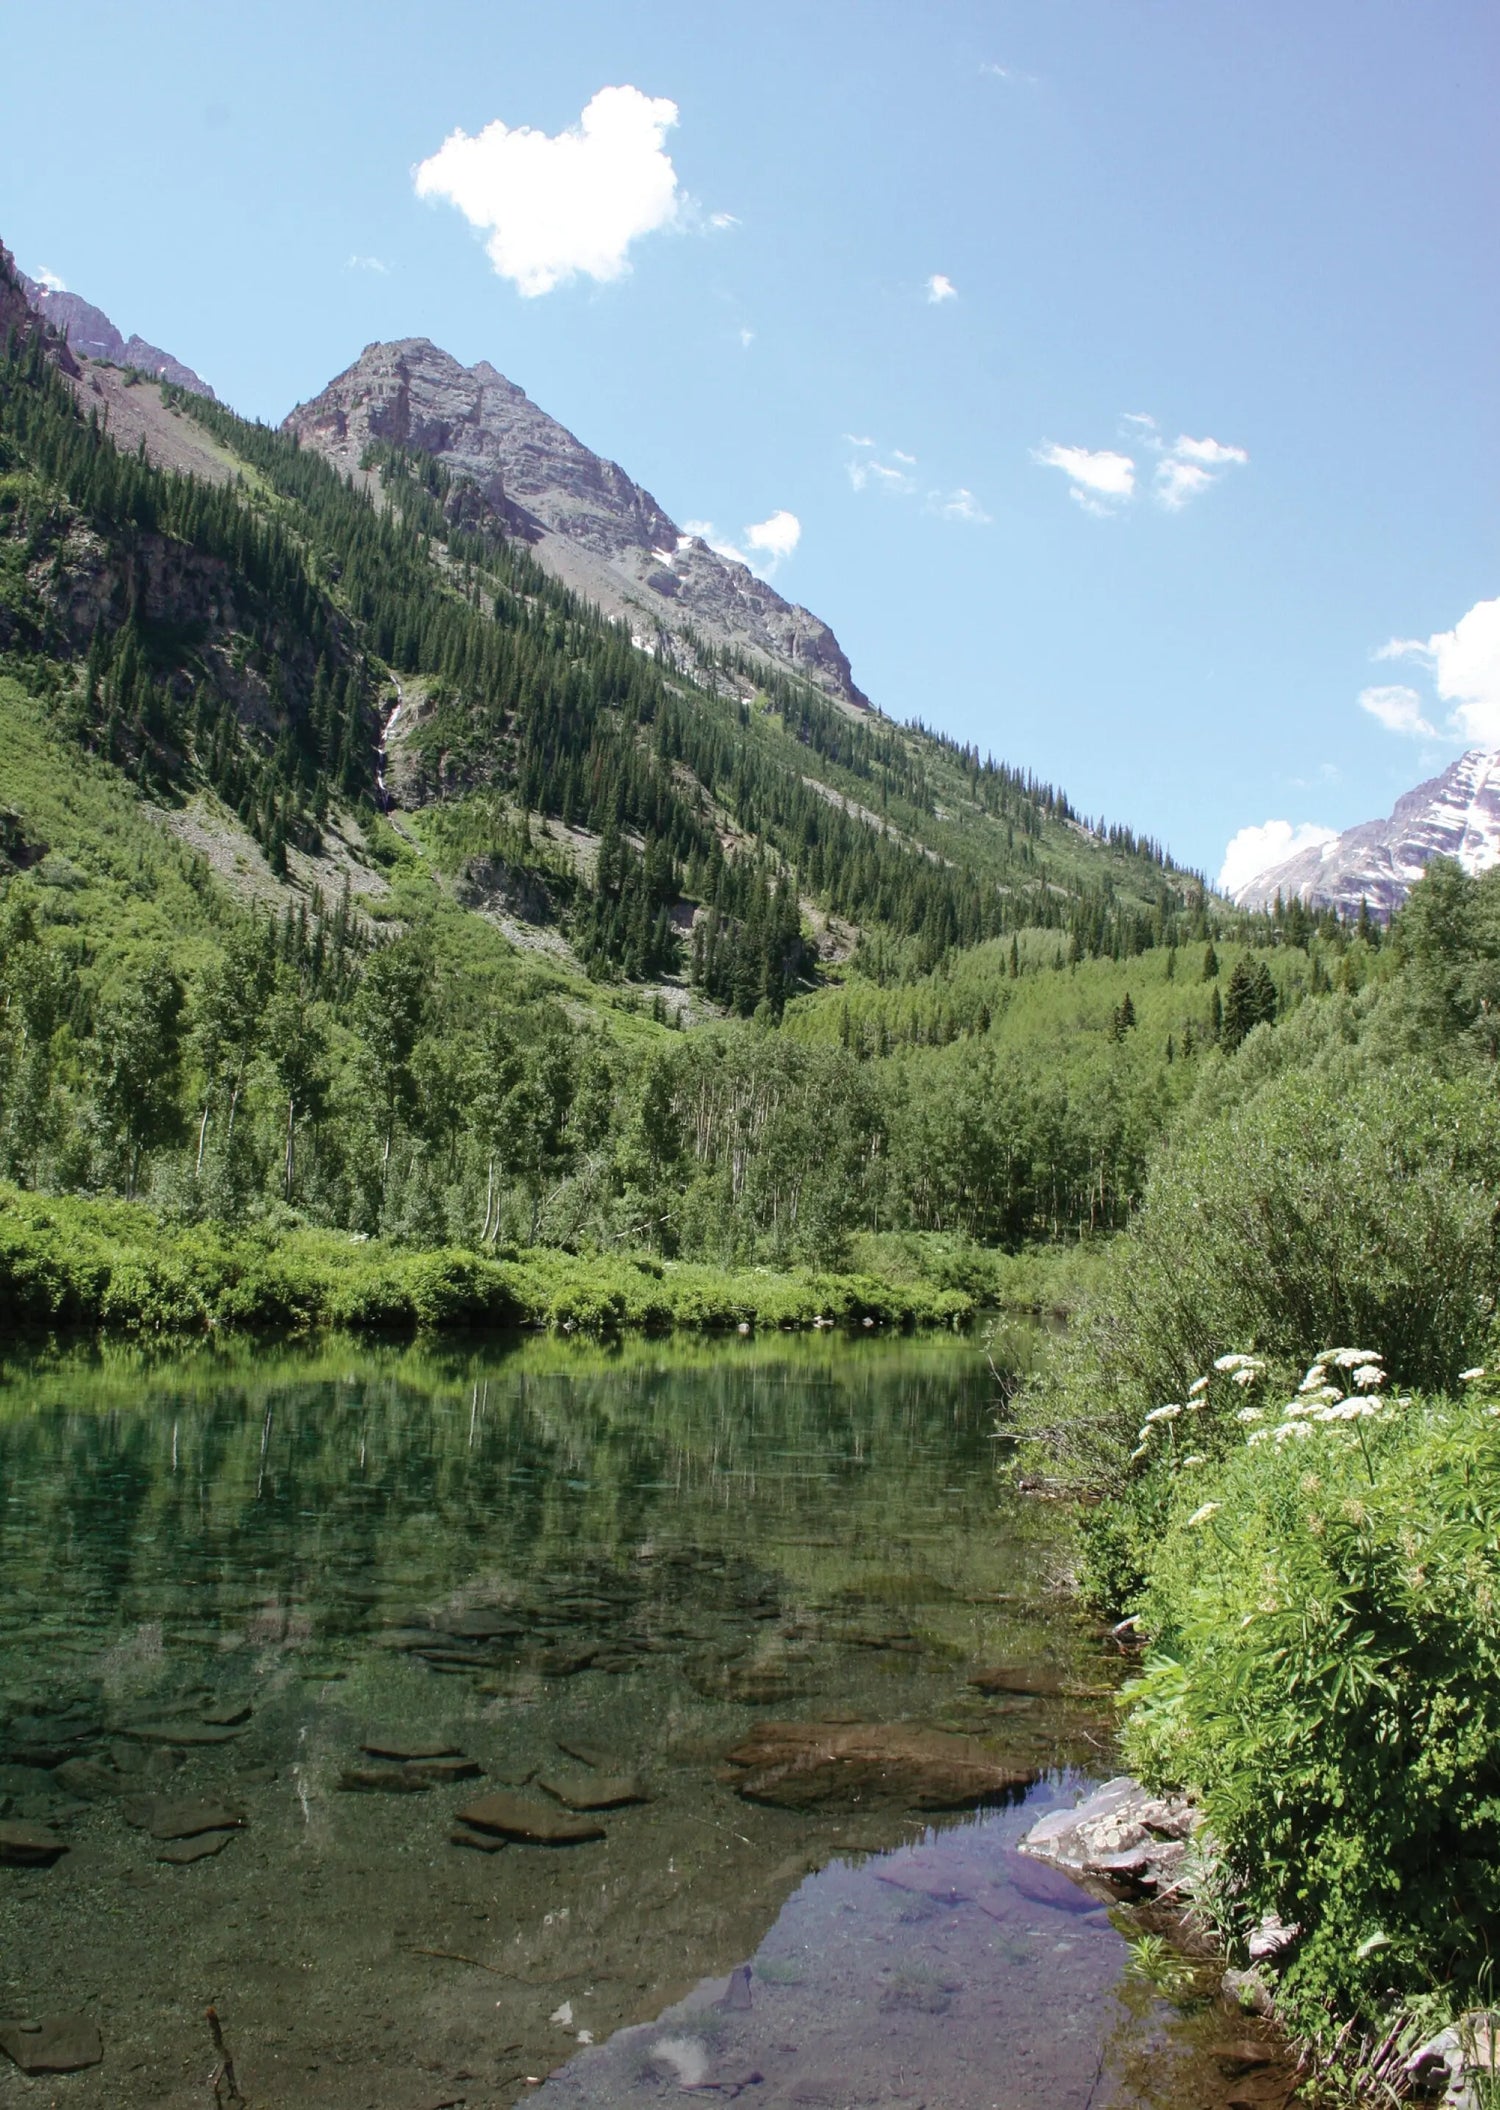 A scenic photo of a calm pond reflecting the vibrant green meadow in Aspen, Colorado during springtime. Wildflowers bloom along the meadow's edge, with snow-capped mountains visible in the distance.